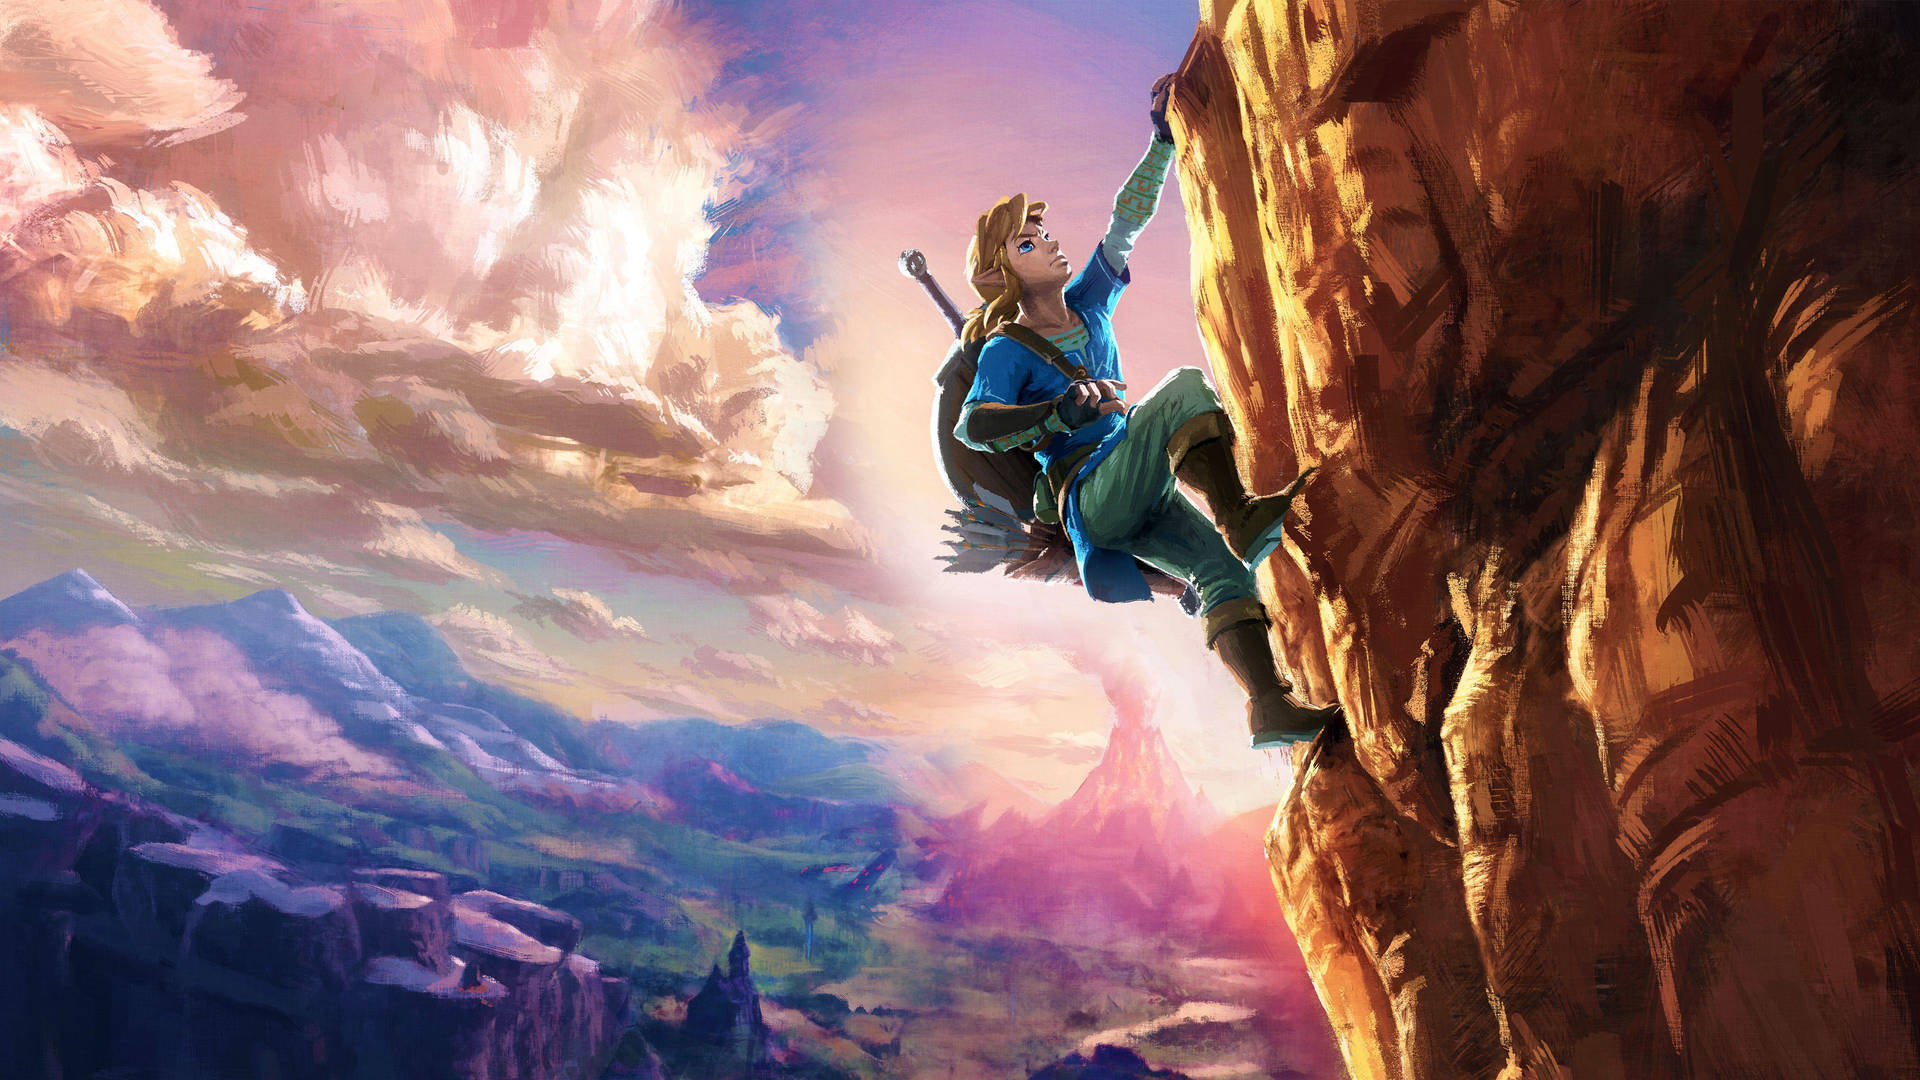 Explore the world of Hyrule in the critically acclaimed adventure game, Breath of the Wild. Wallpaper